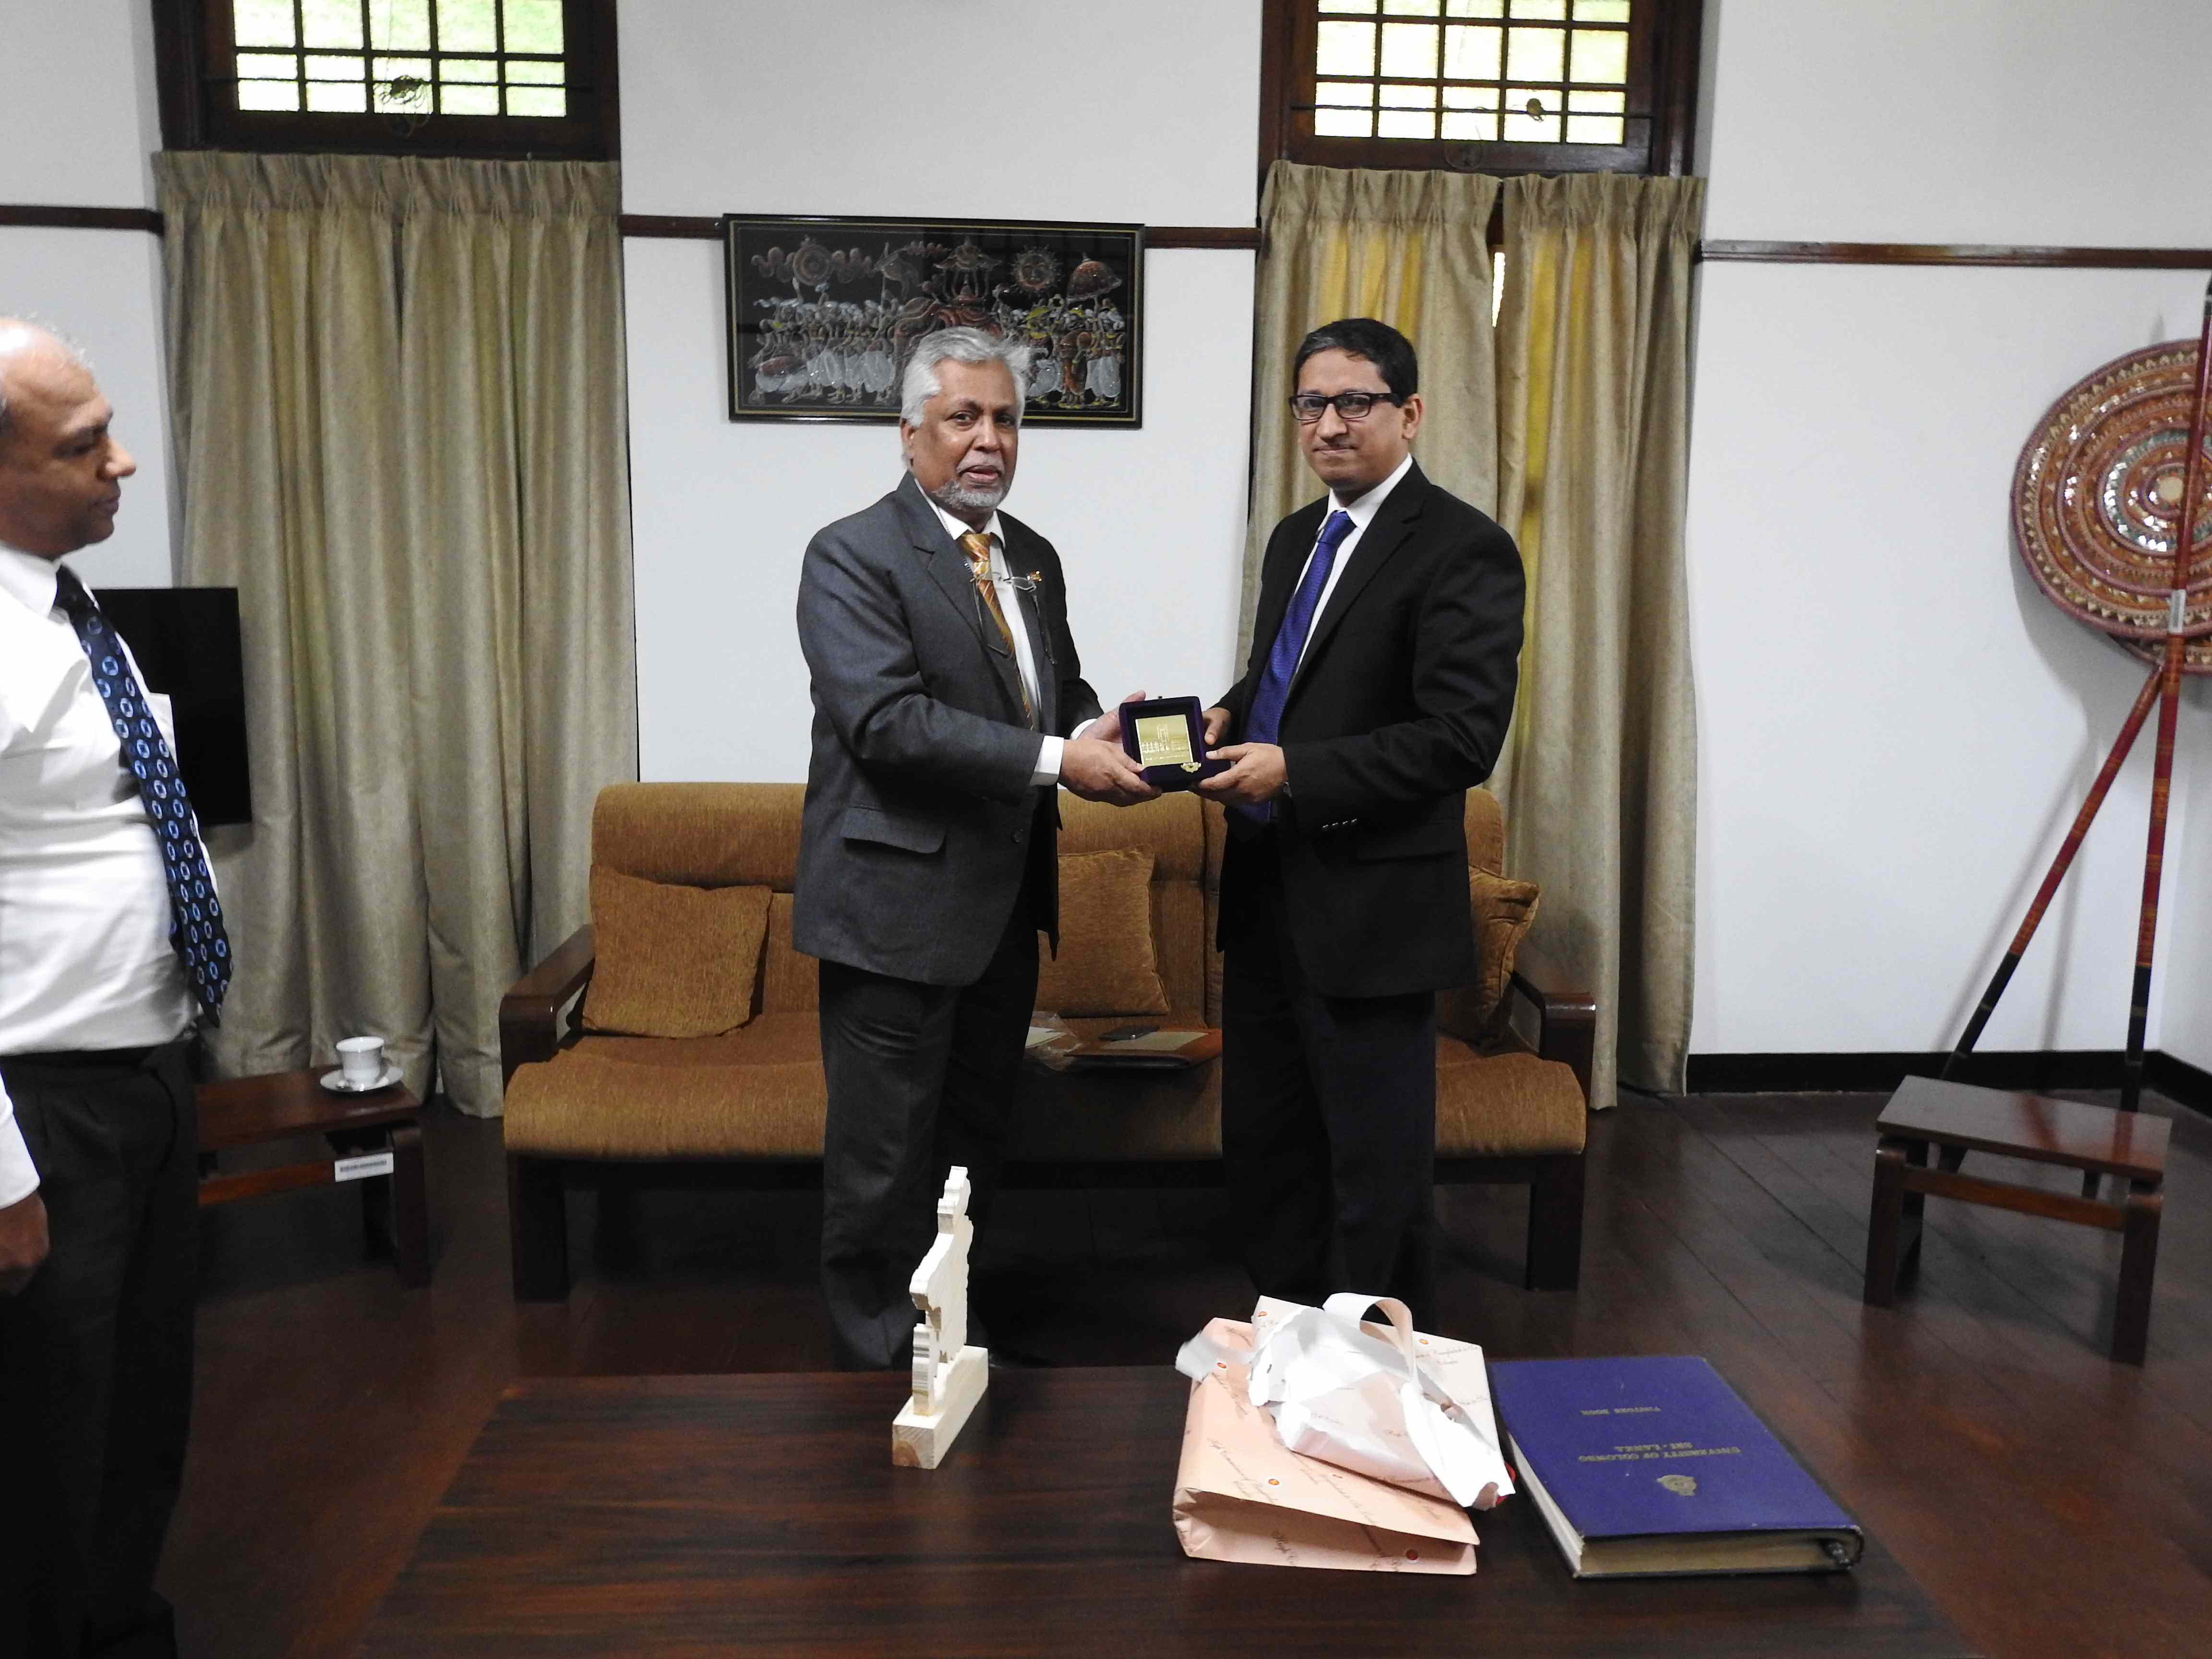 His Excellency Mr.Riaz hamidullah, the high commissioner of People’s Republic of Bangladesh visited University of Colombo